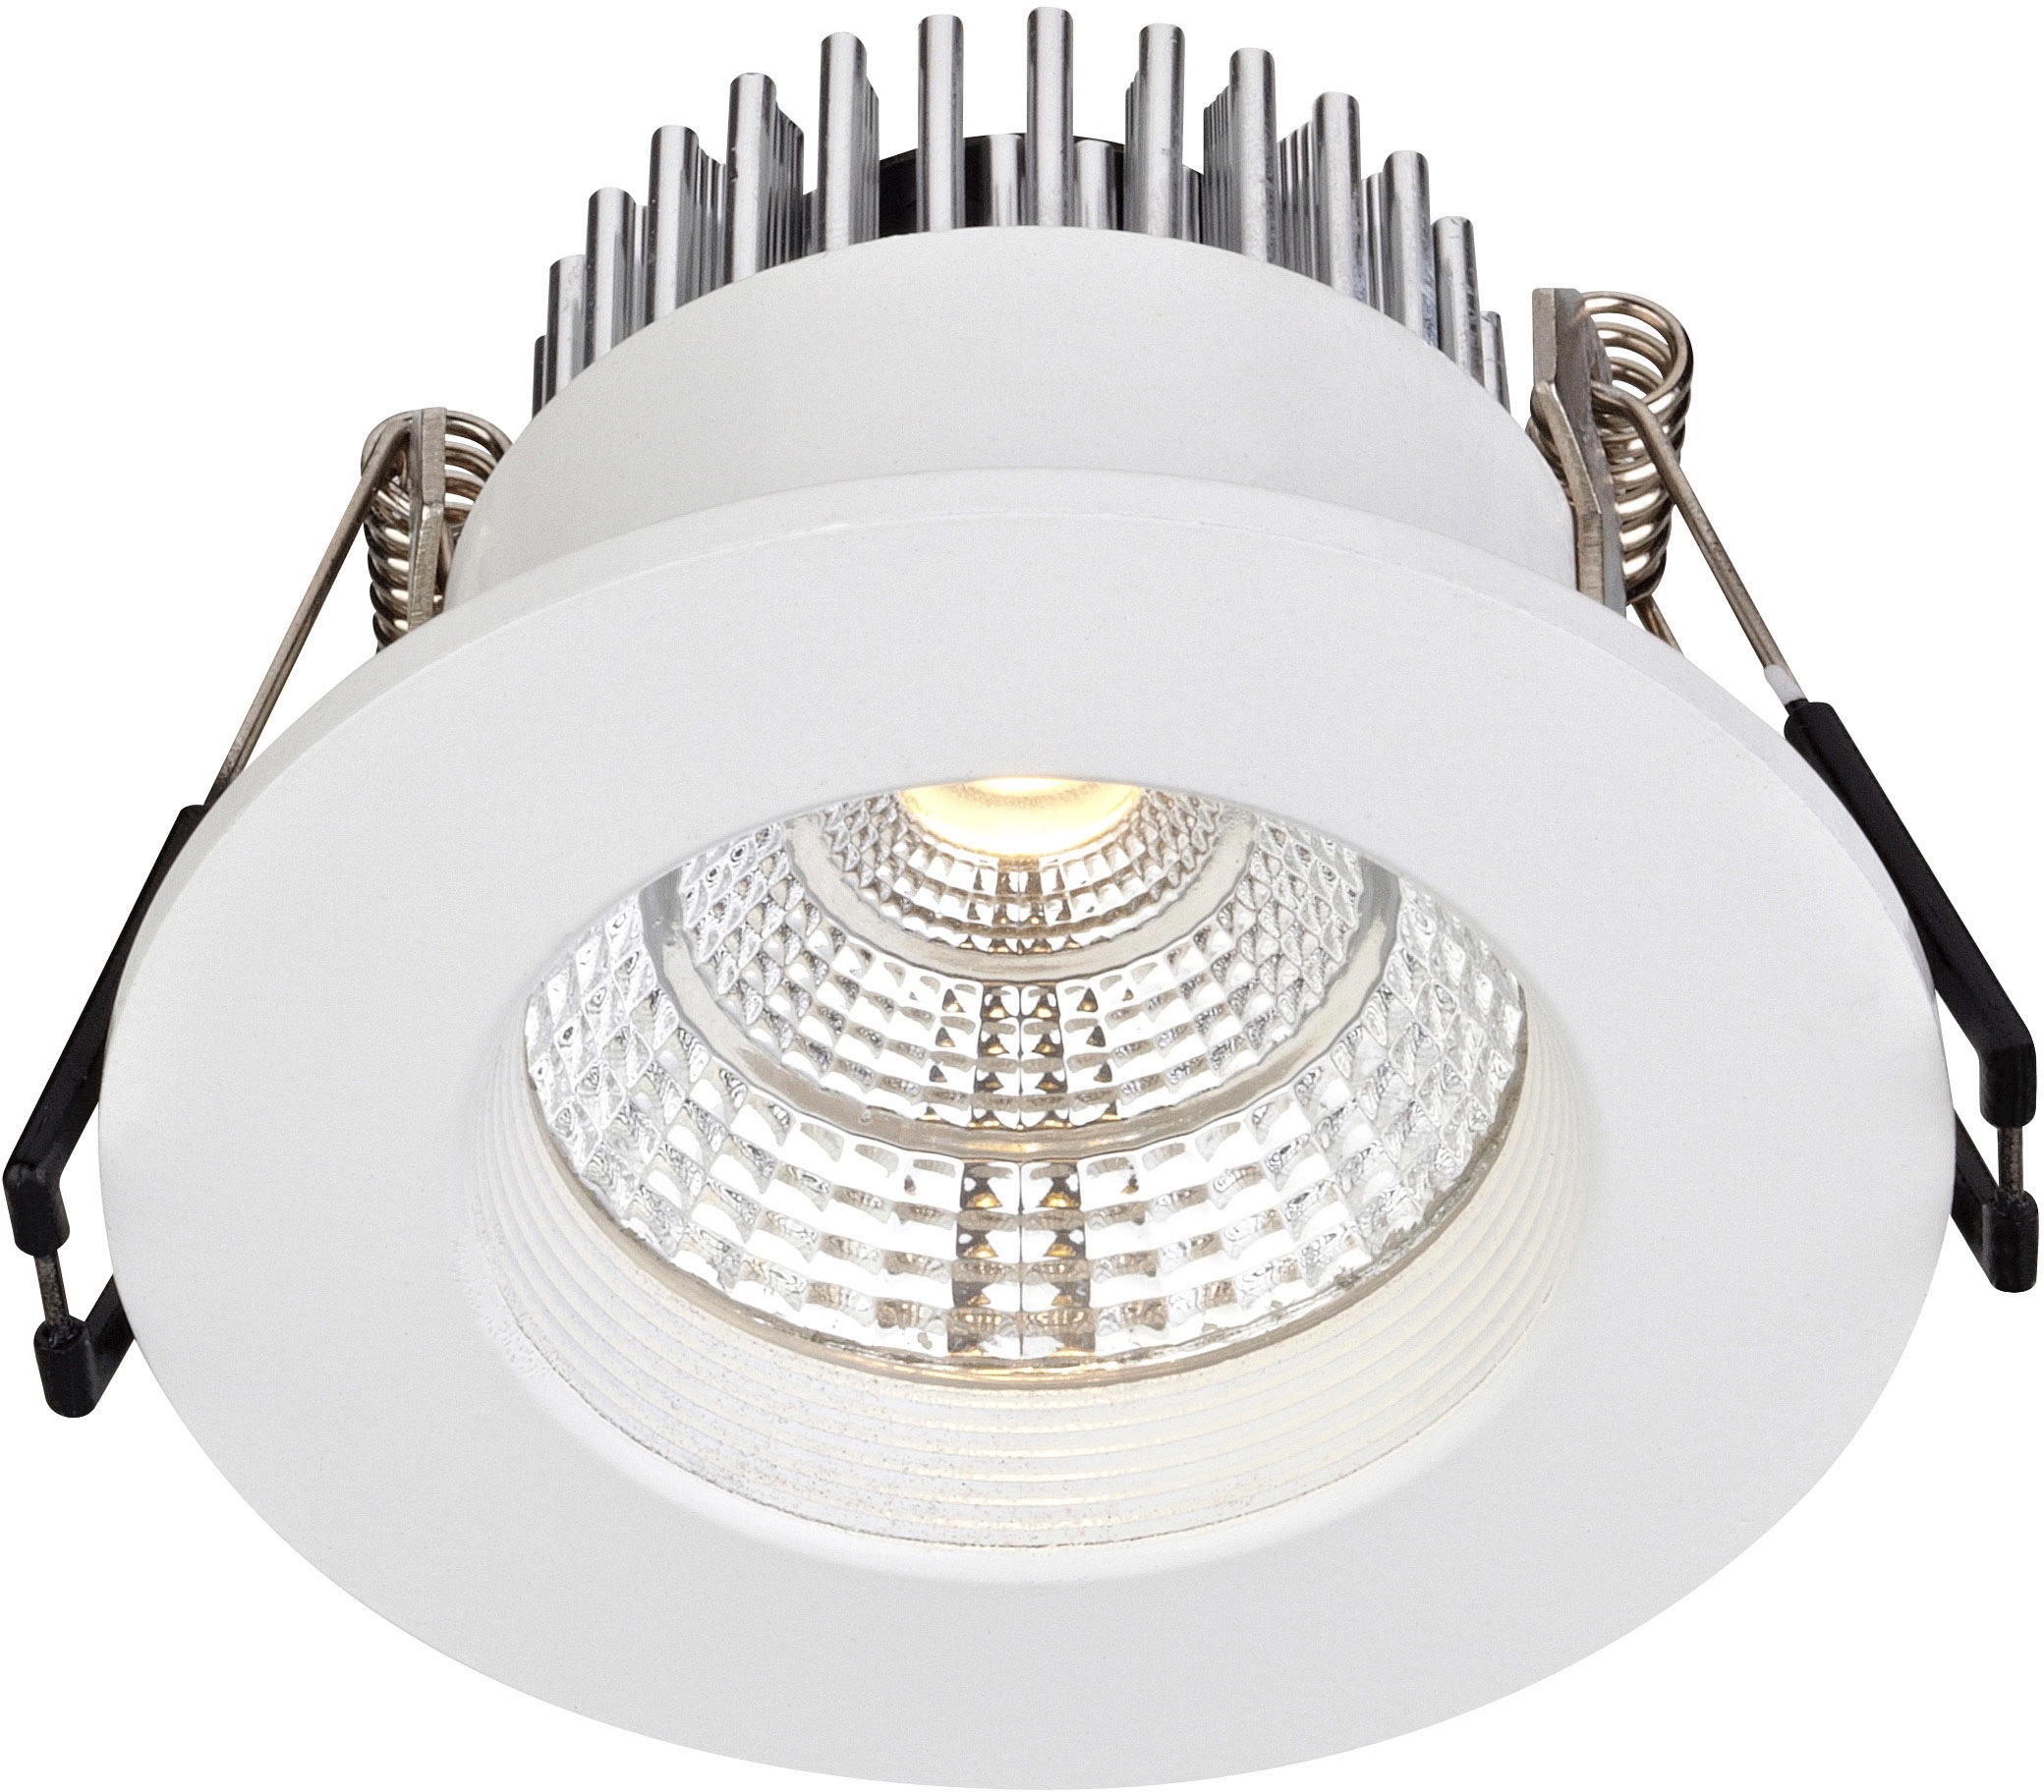 Ares downlight 3-set LED